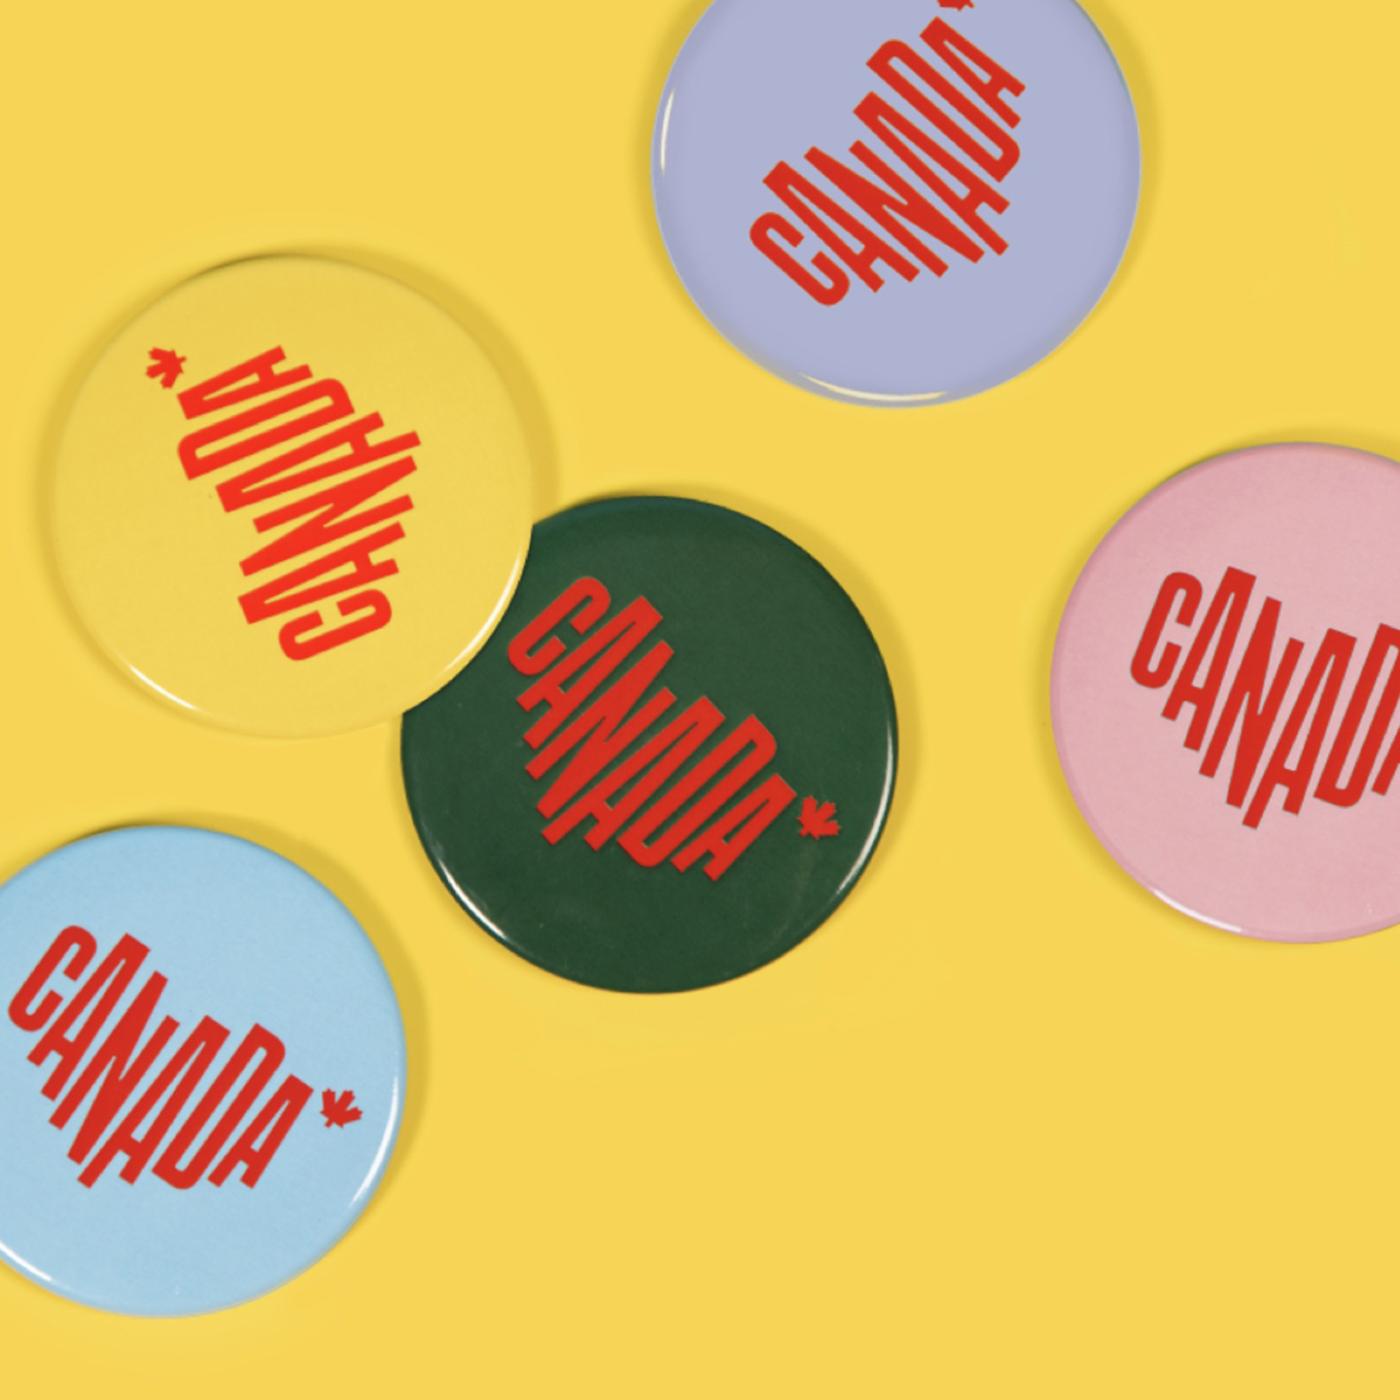 Five circular pins are scattered on a yellow background, each of the pins is a different solid colour with a red Canada logo centered in the middle.